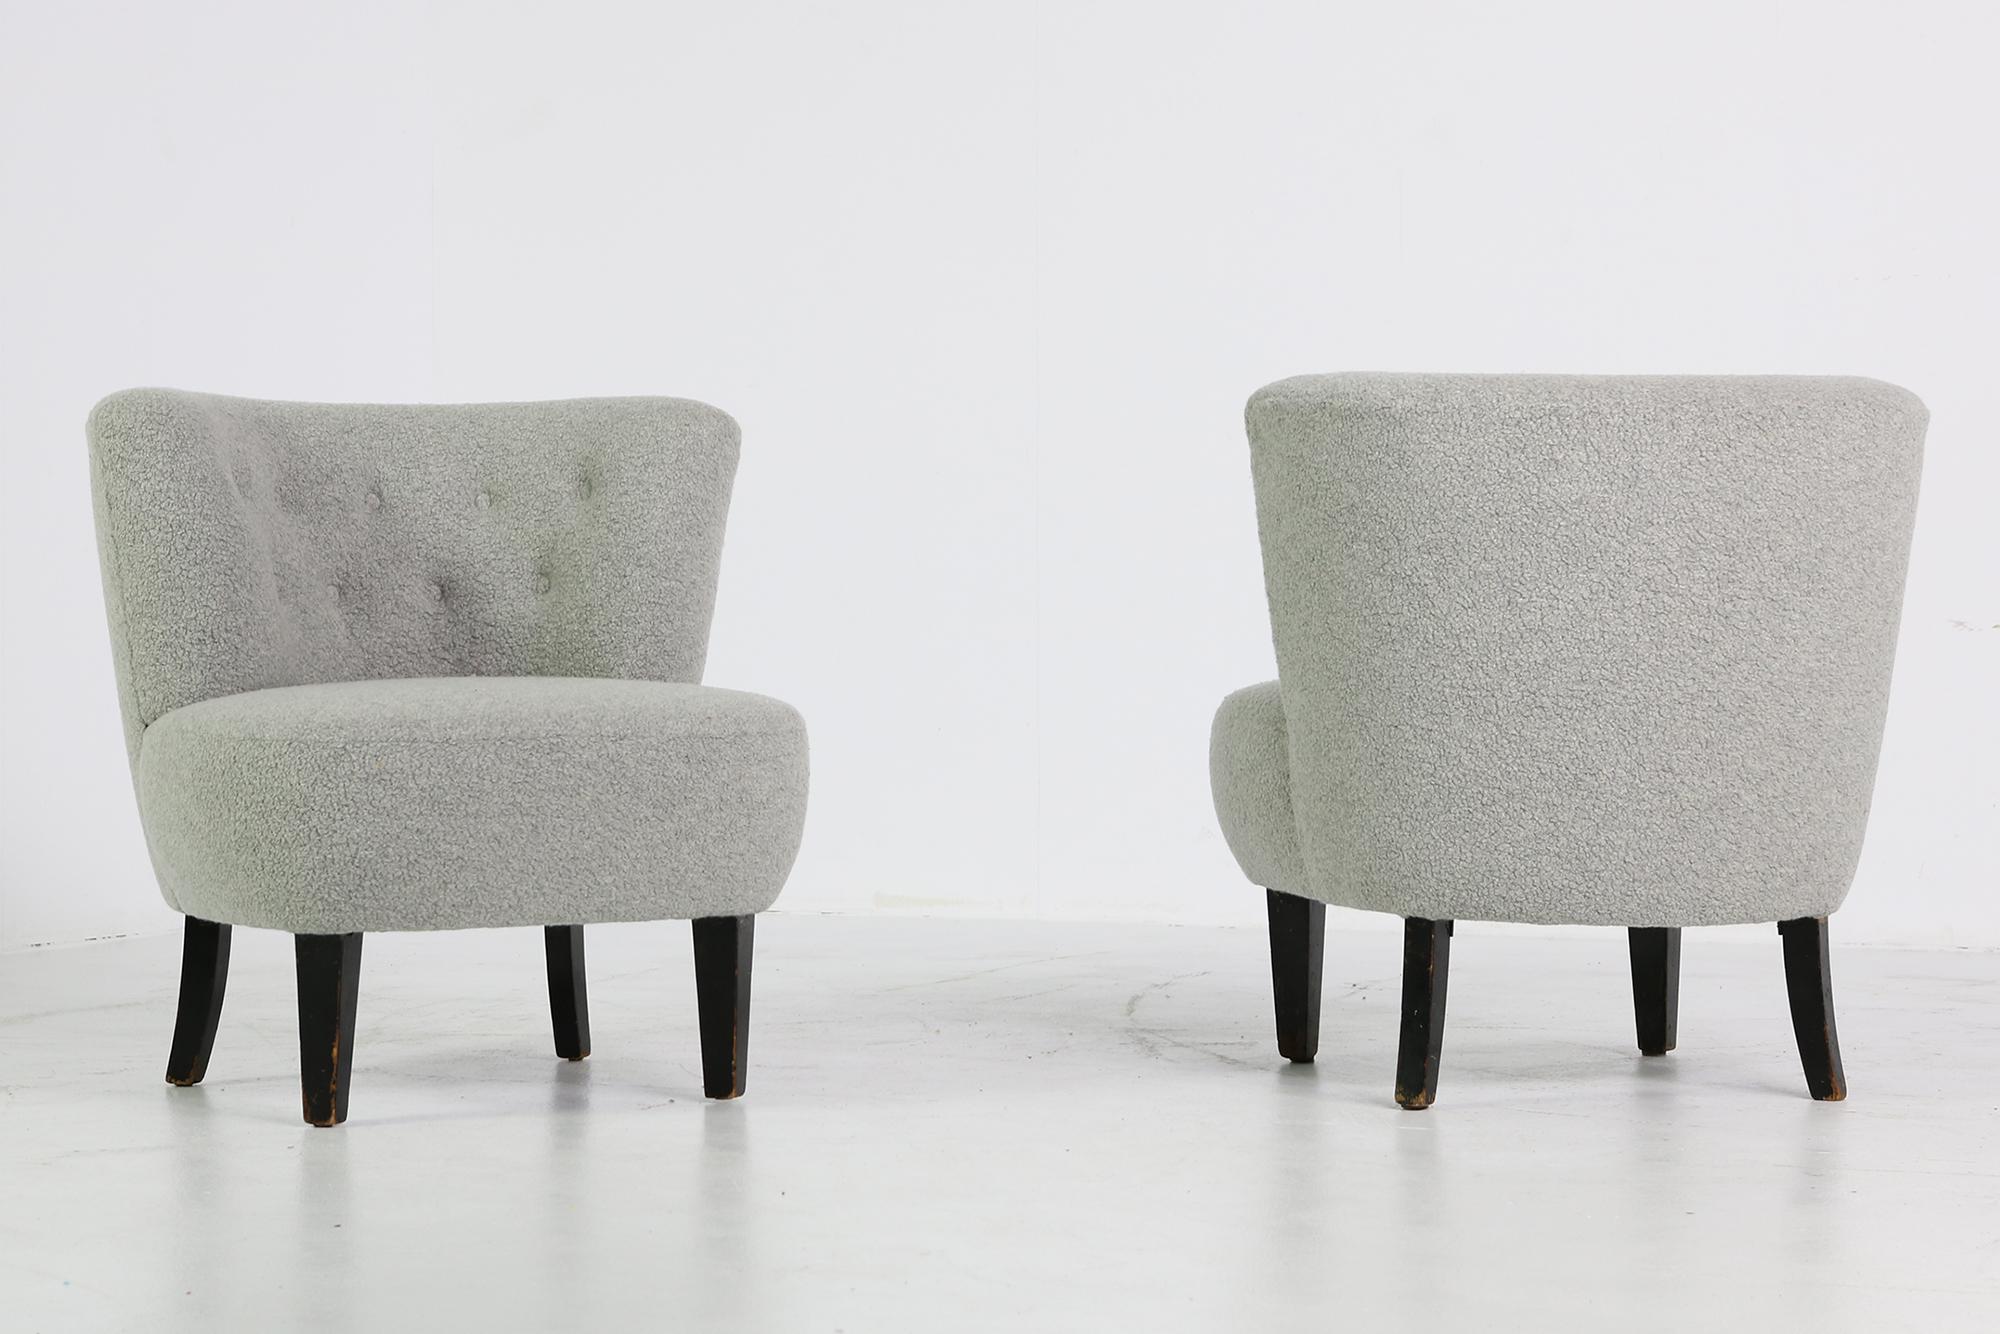 Pair of Curved Mid-Century Lounge Clam Chairs, Sweden 1950s, Boucle Fur, grey (Kunstpelz)